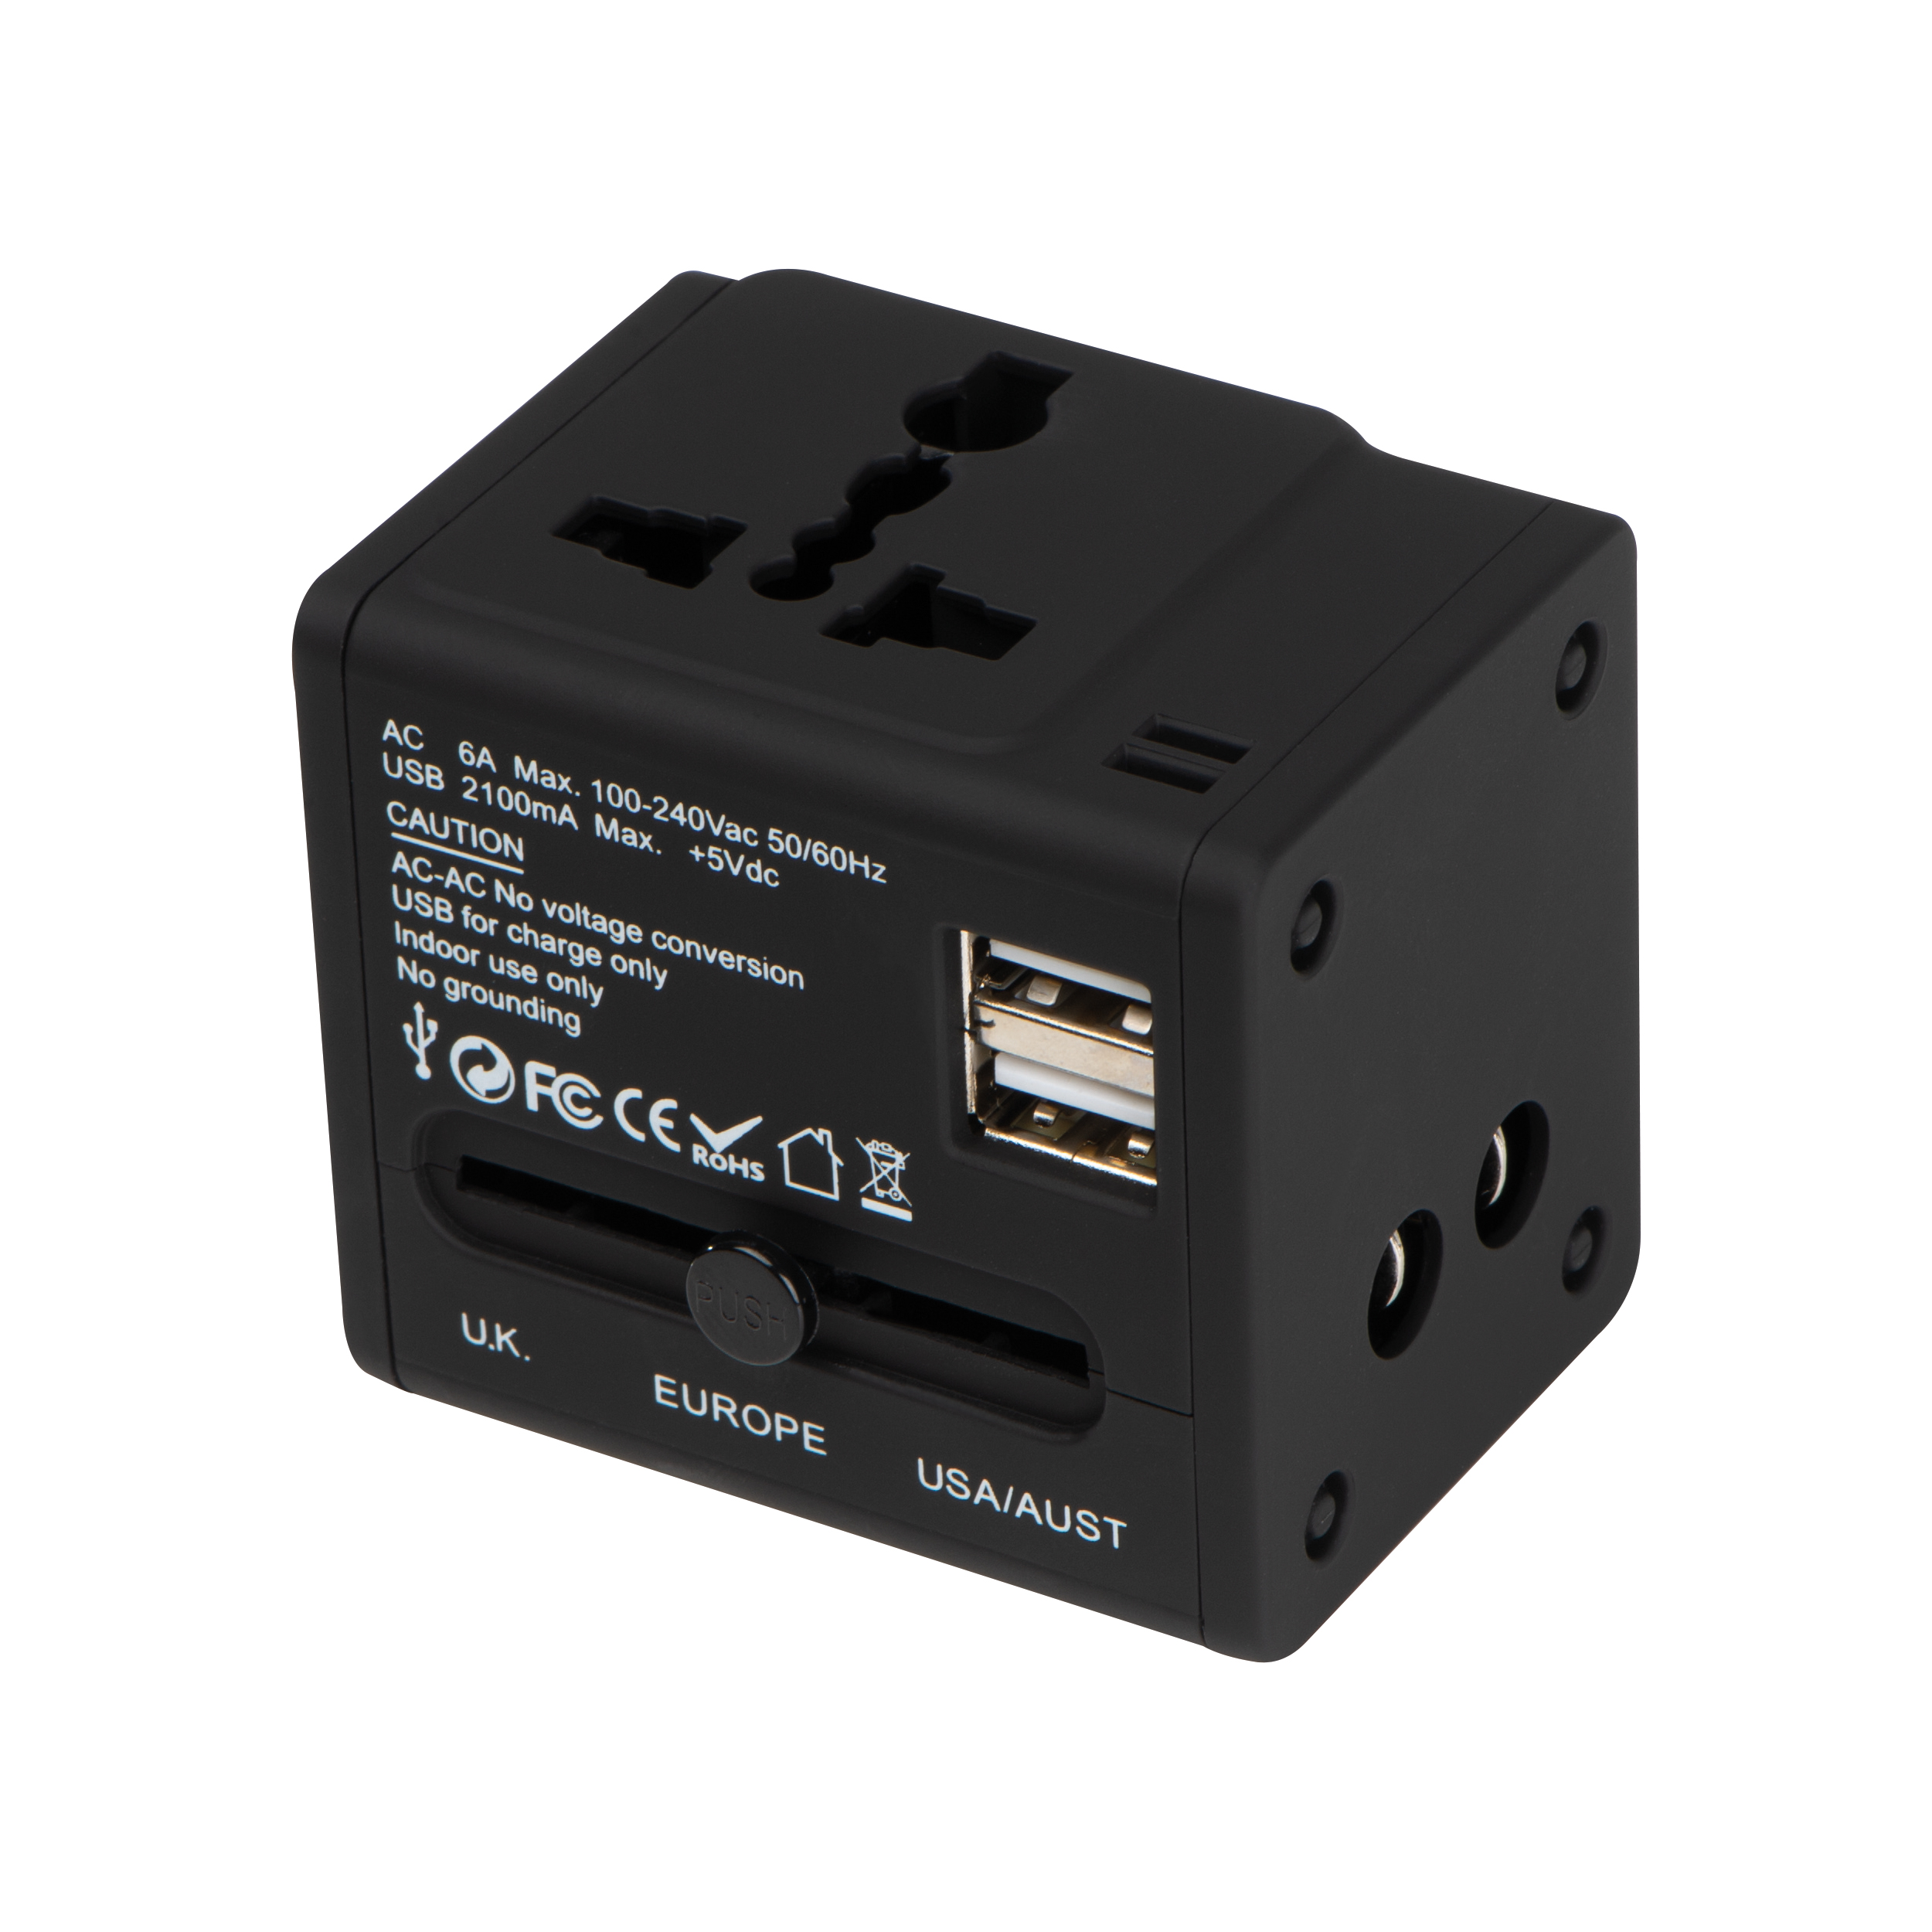 Rubberized travel adapter